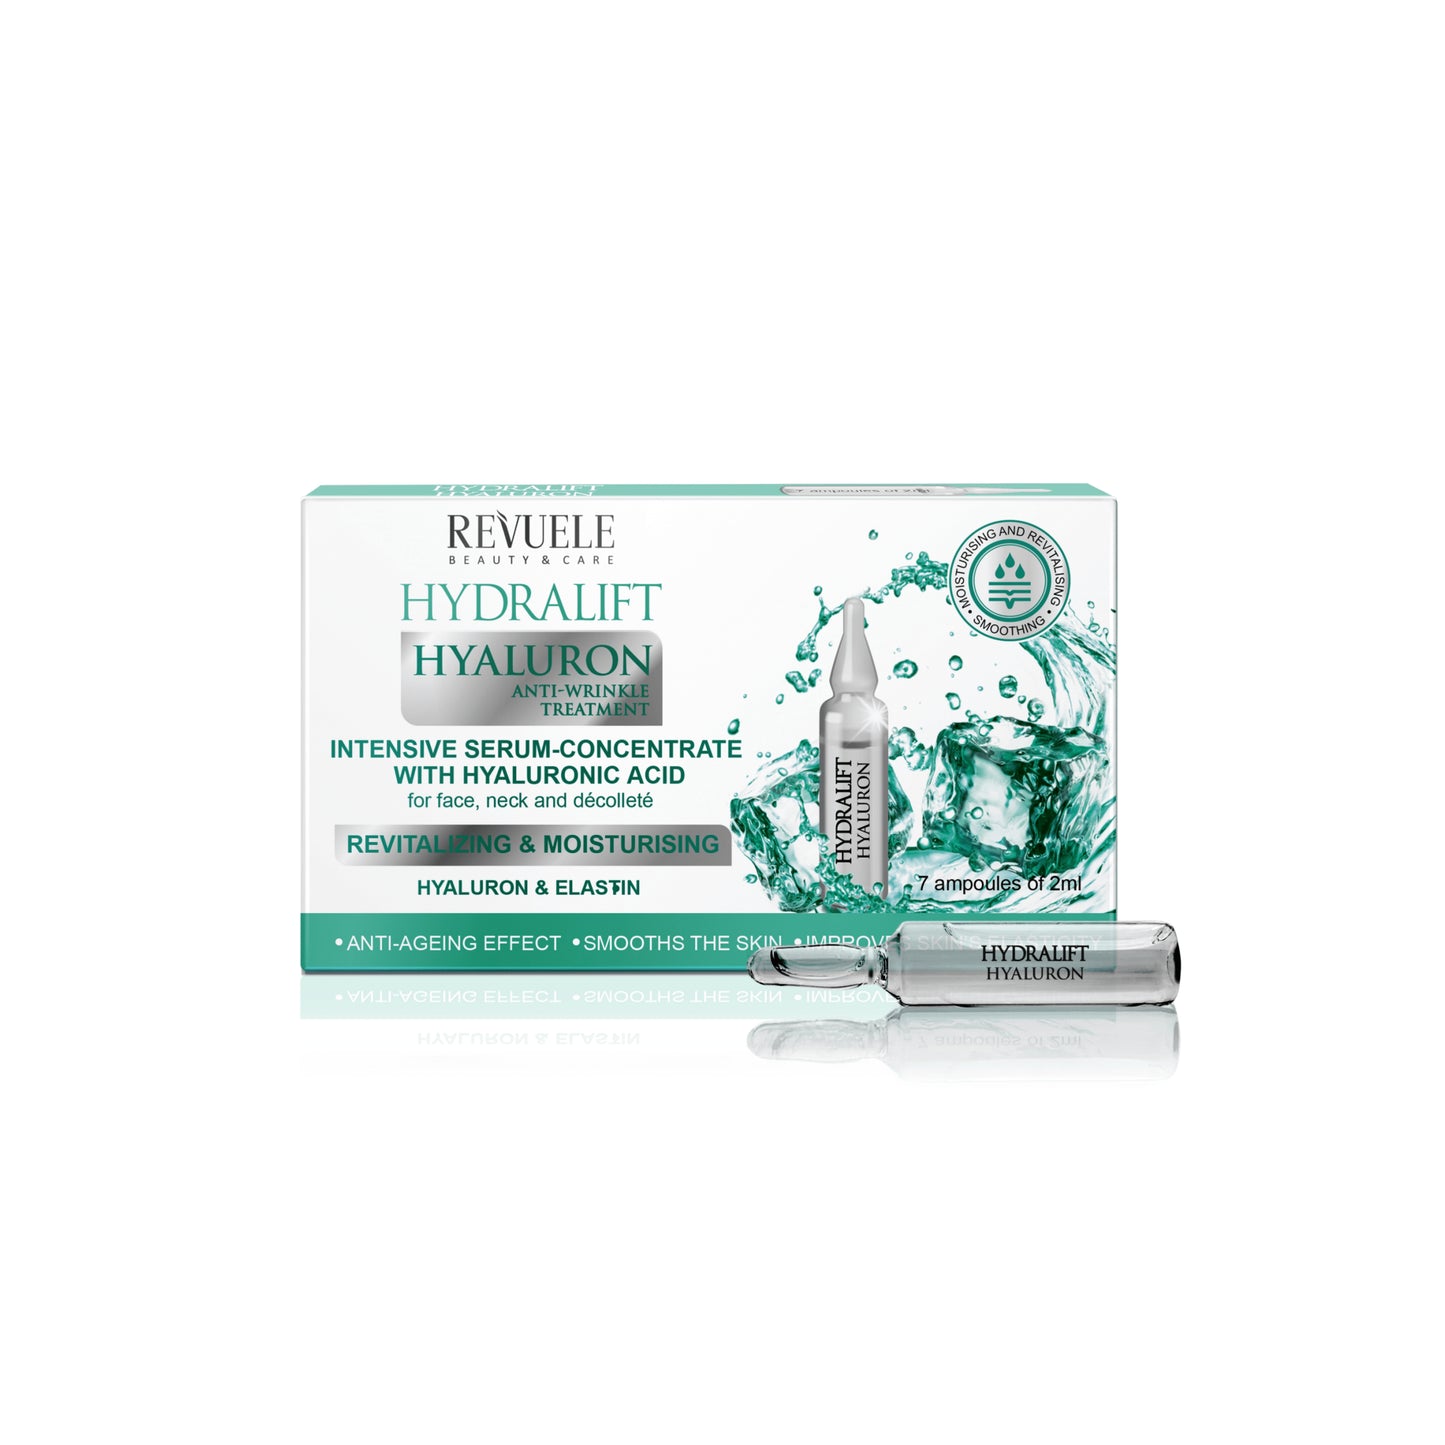 REVUELE | HYDRALIFT HYALURON Ampoules Intensive Serum-concentrate With Hyaluronic Acid